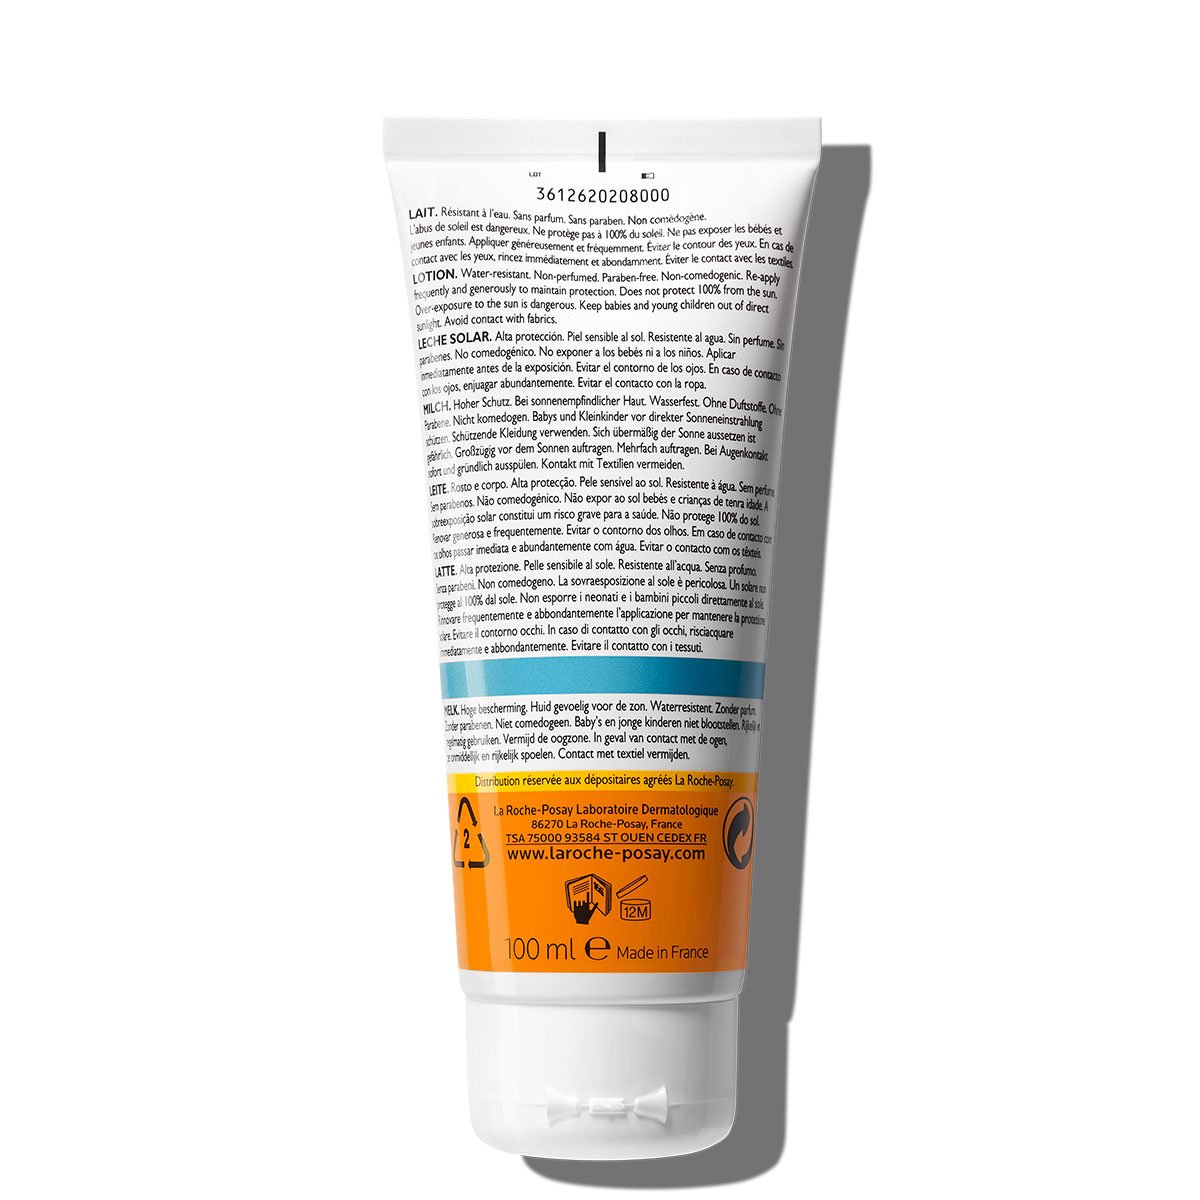 La Roche Posay ProductPage Sun Anthelios Smooth Lotion Spf30 100ml 333